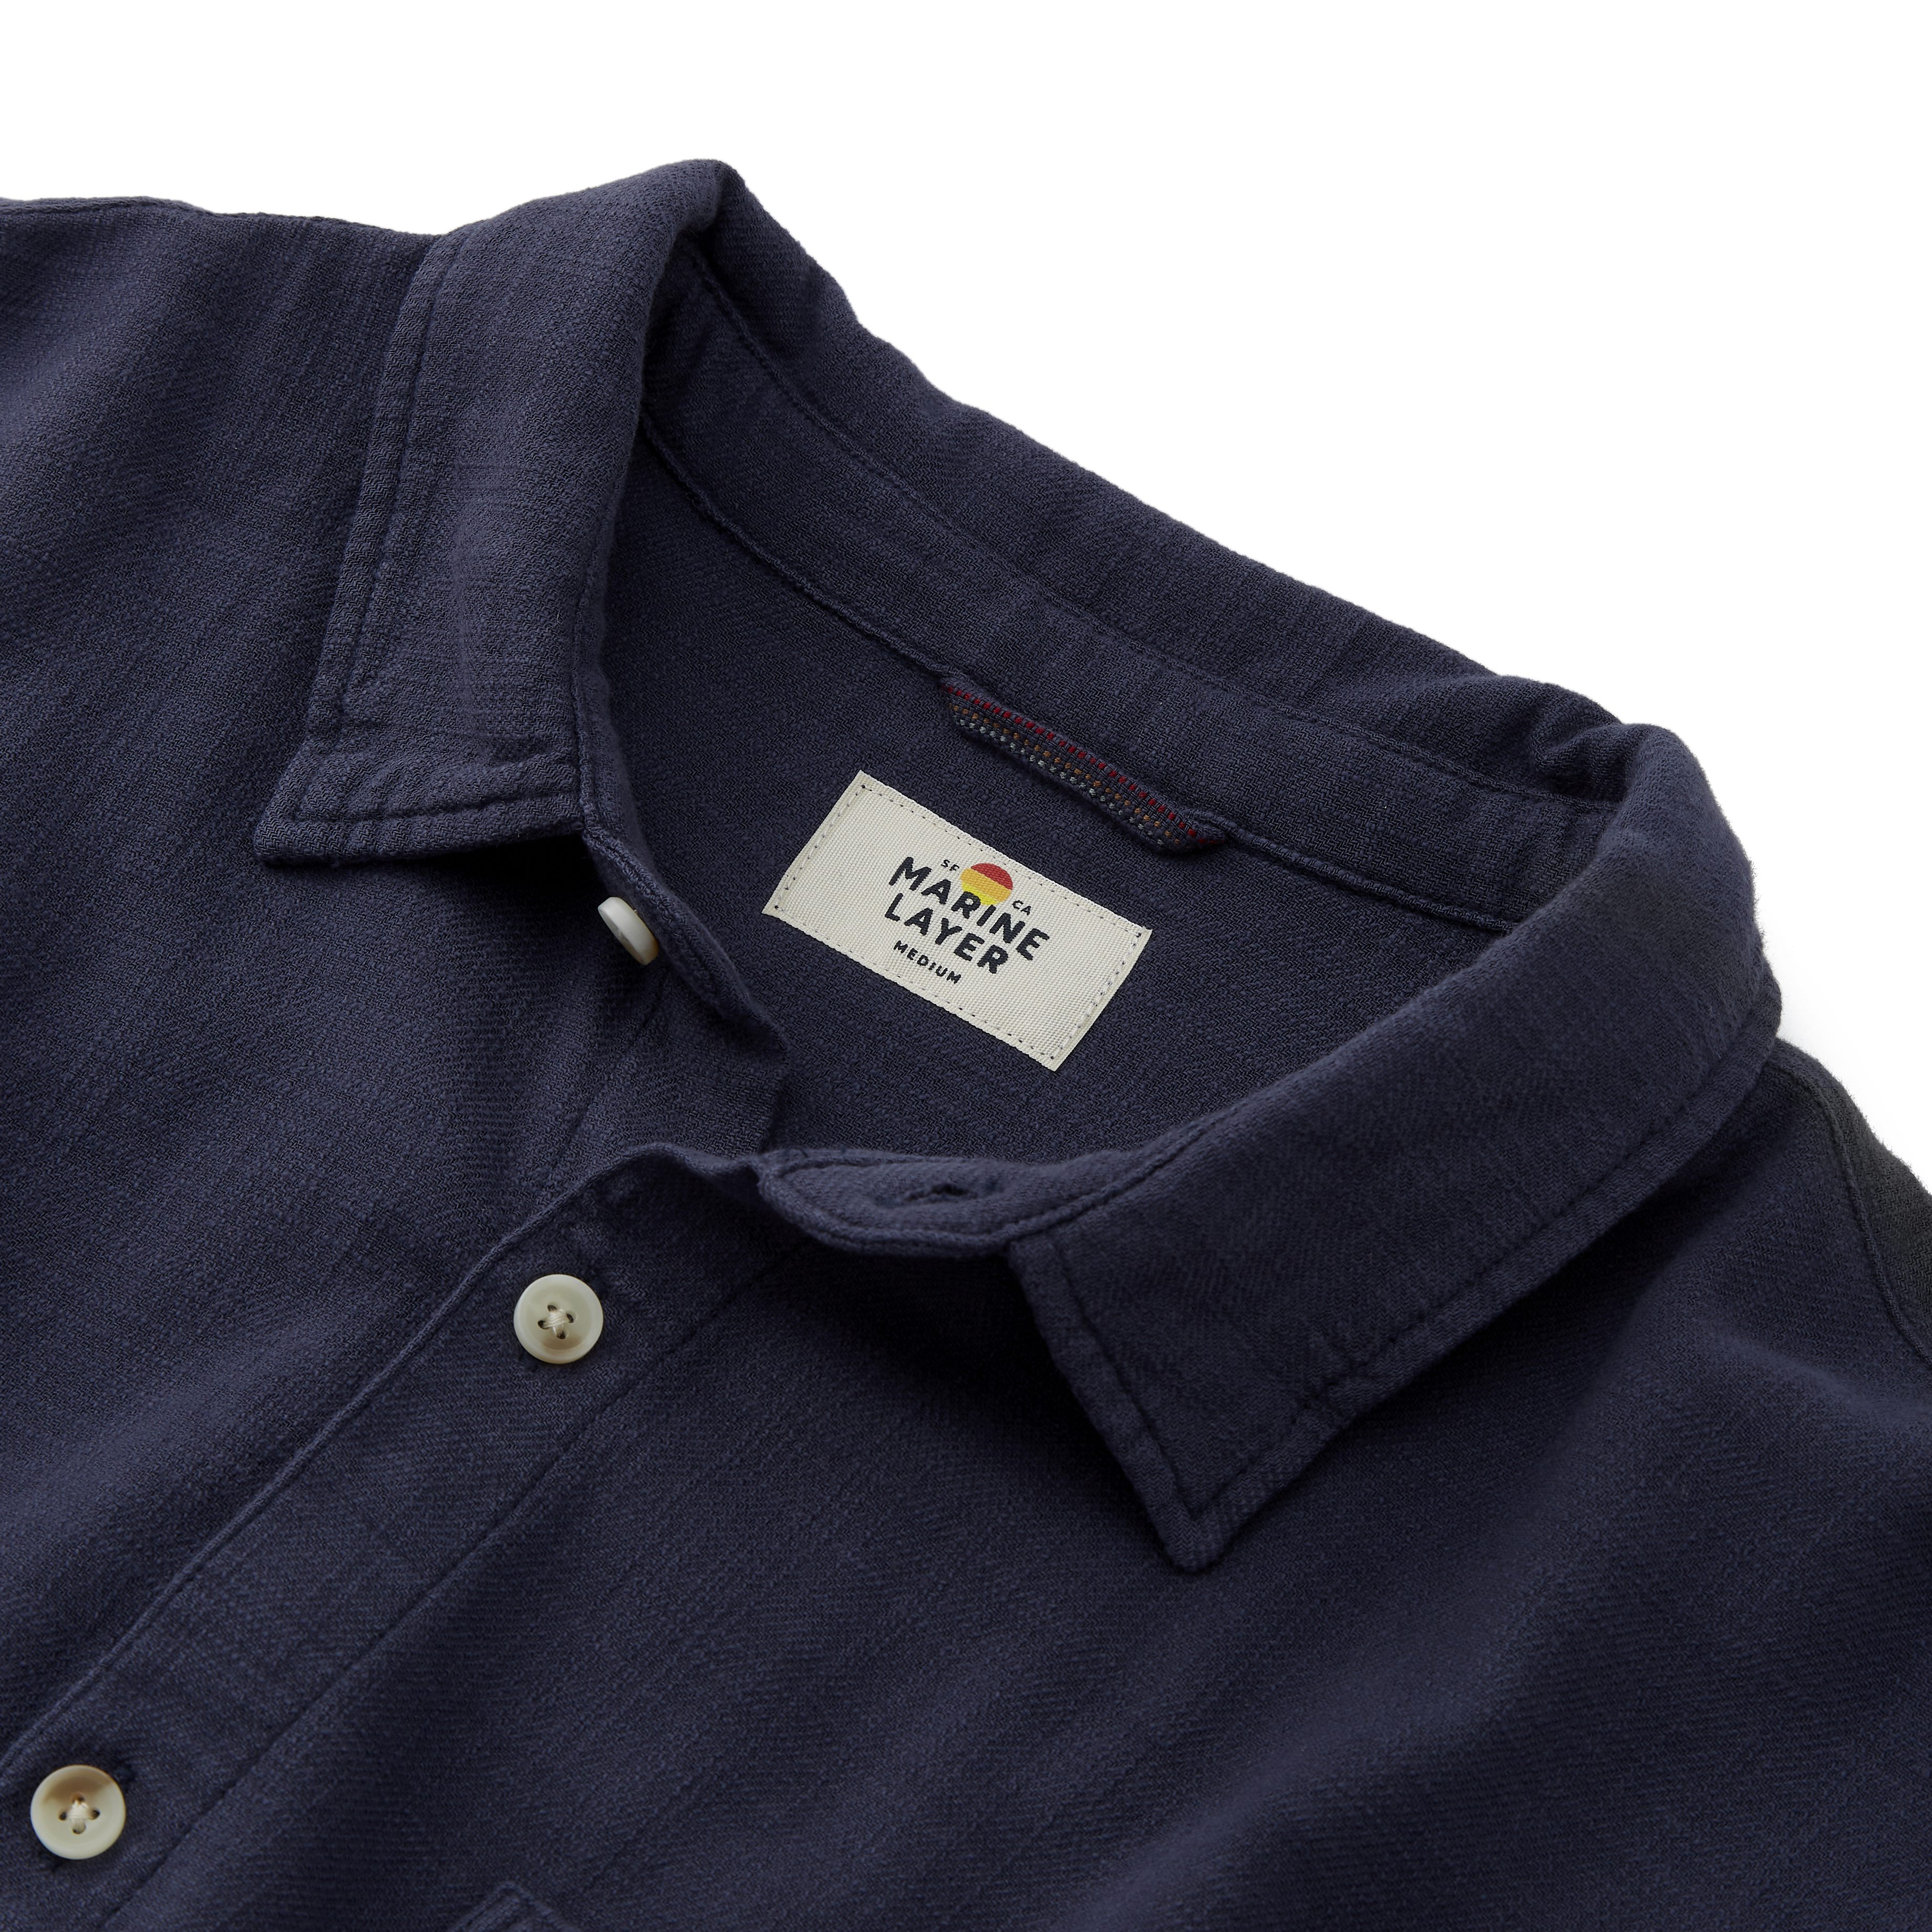 Marine Layer Classic Stretch Selvage Long Sleeve Shirt - Mood